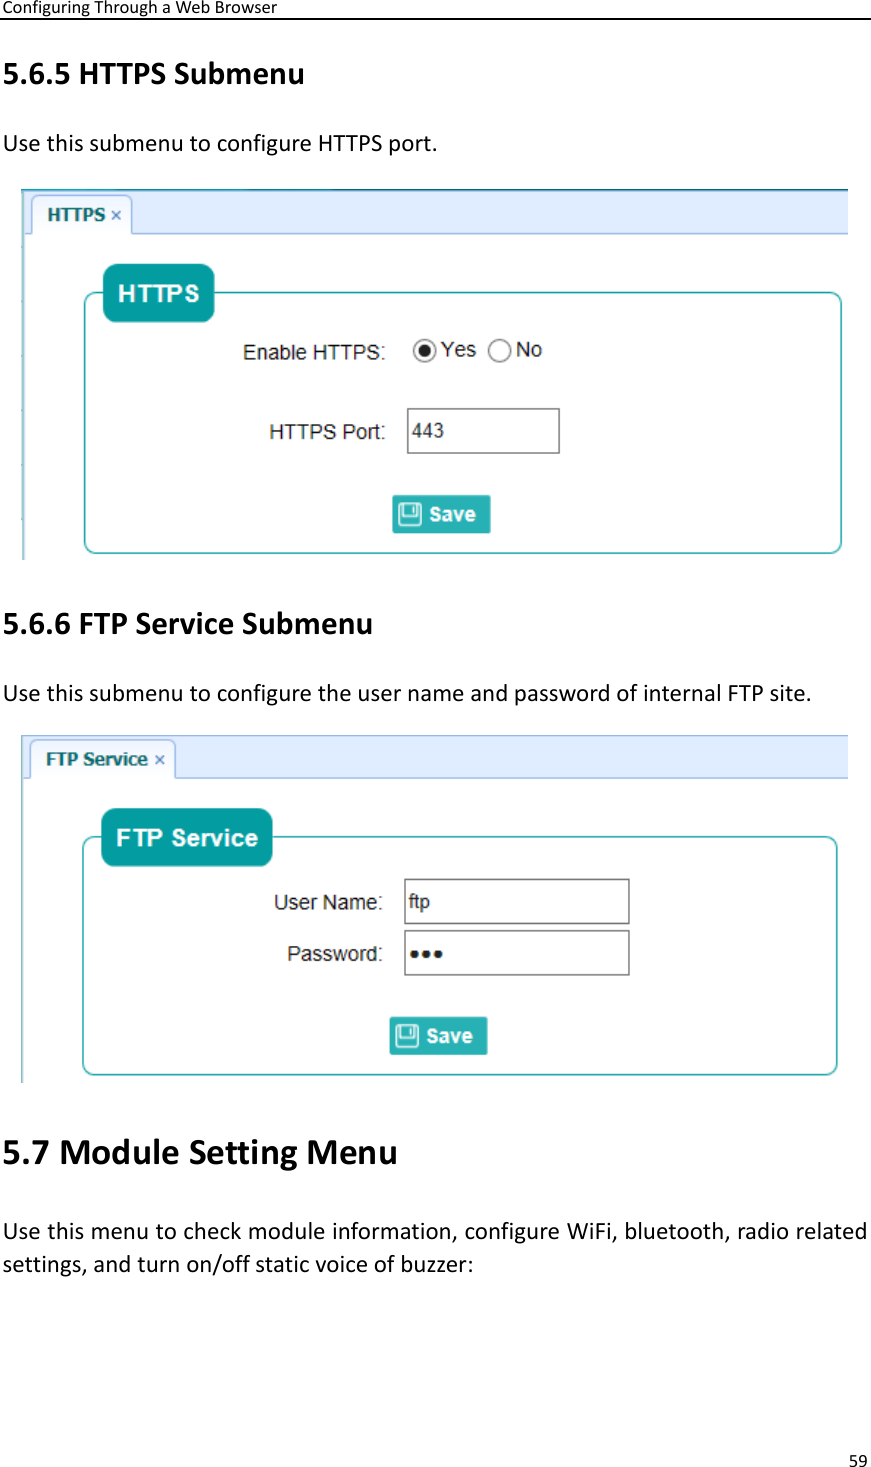 Configuring Through a Web Browser 59  5.6.5 HTTPS Submenu Use this submenu to configure HTTPS port.  5.6.6 FTP Service Submenu Use this submenu to configure the user name and password of internal FTP site.  5.7 Module Setting Menu Use this menu to check module information, configure WiFi, bluetooth, radio related settings, and turn on/off static voice of buzzer:   